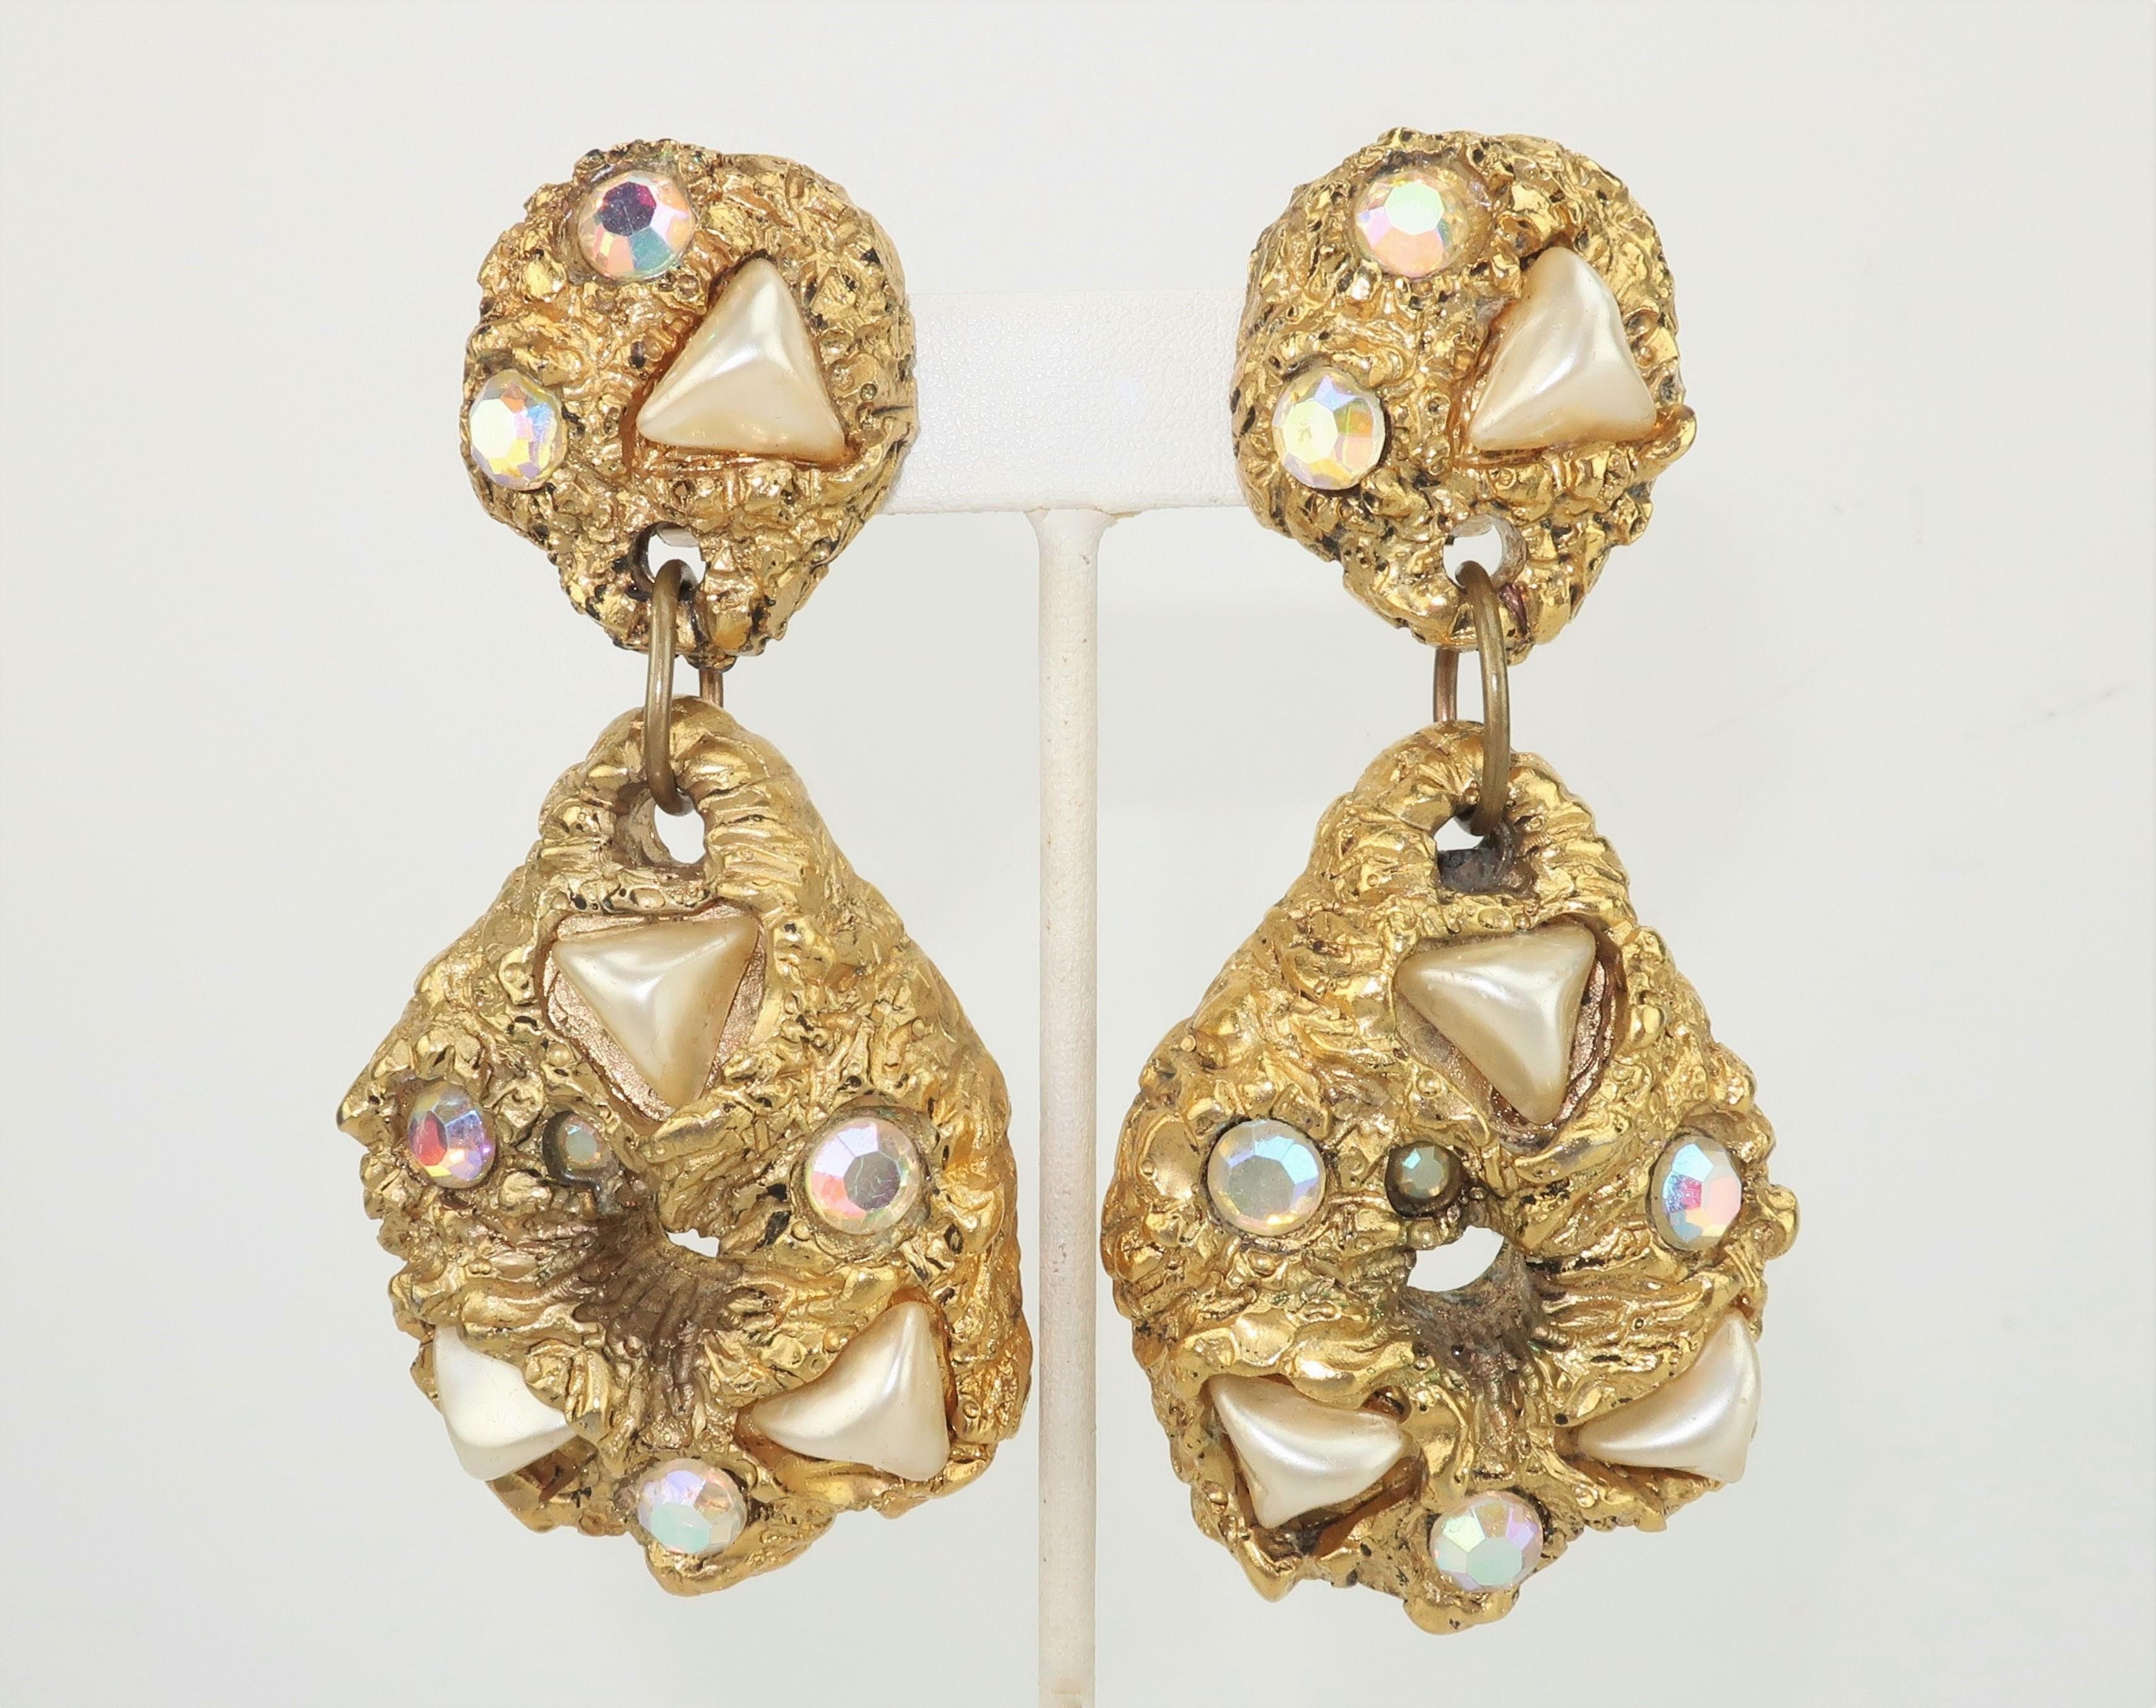 Large and in charge ... faux and fabulous!  These statement making 1980's clip on earrings appear to be chunky gold nuggets though they are actually resin decorated with a gold gilt finish and embellished with pearls and iridescent faceted